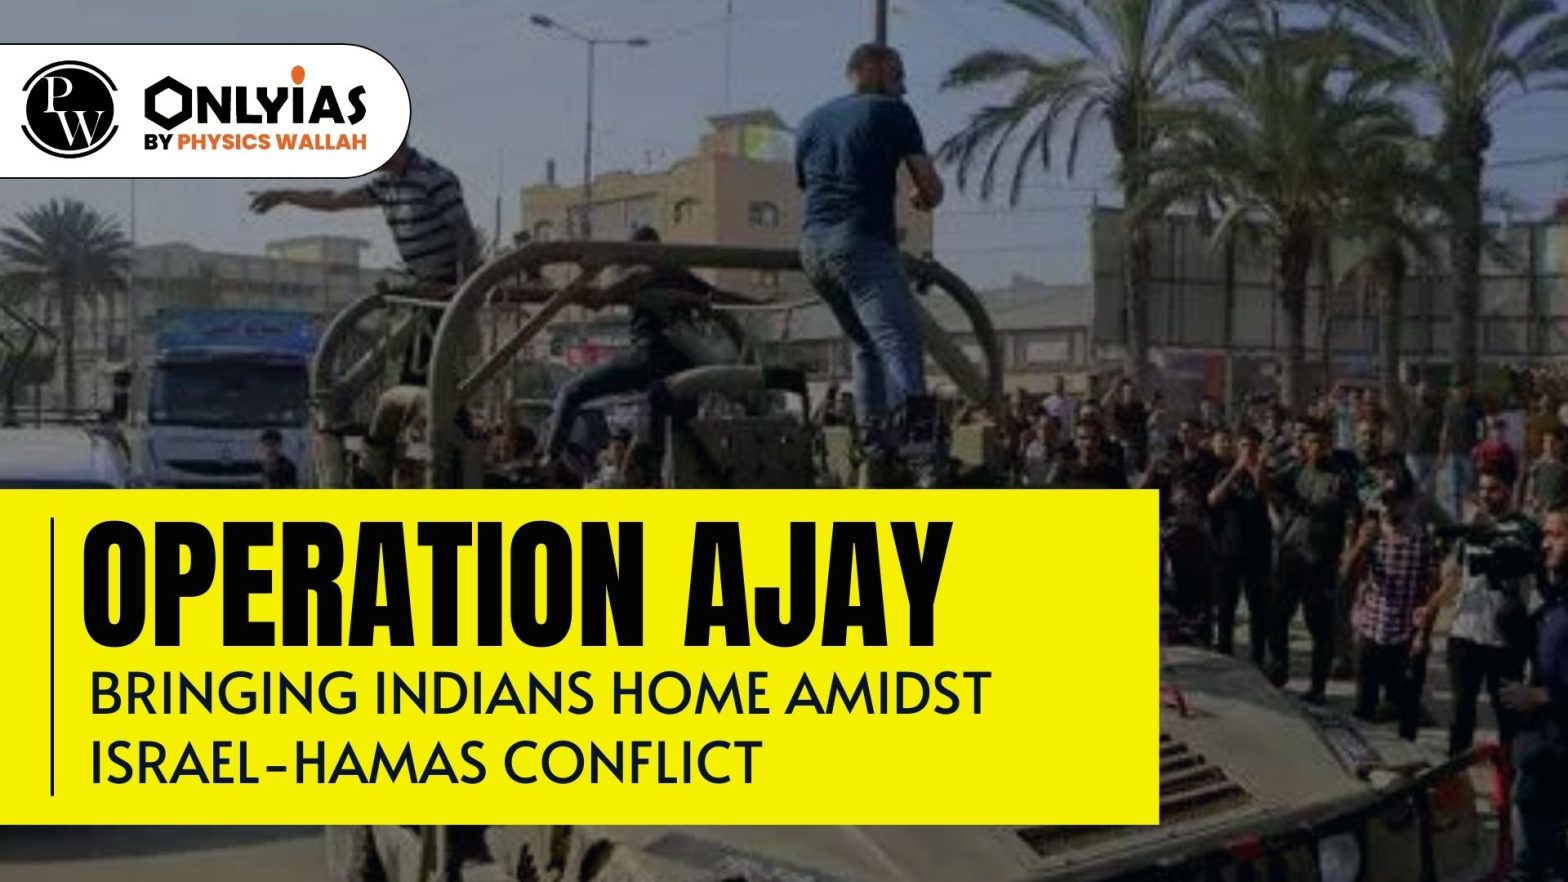 Operation Ajay – Bringing Indians Home Amidst Israel-Hamas Conflict